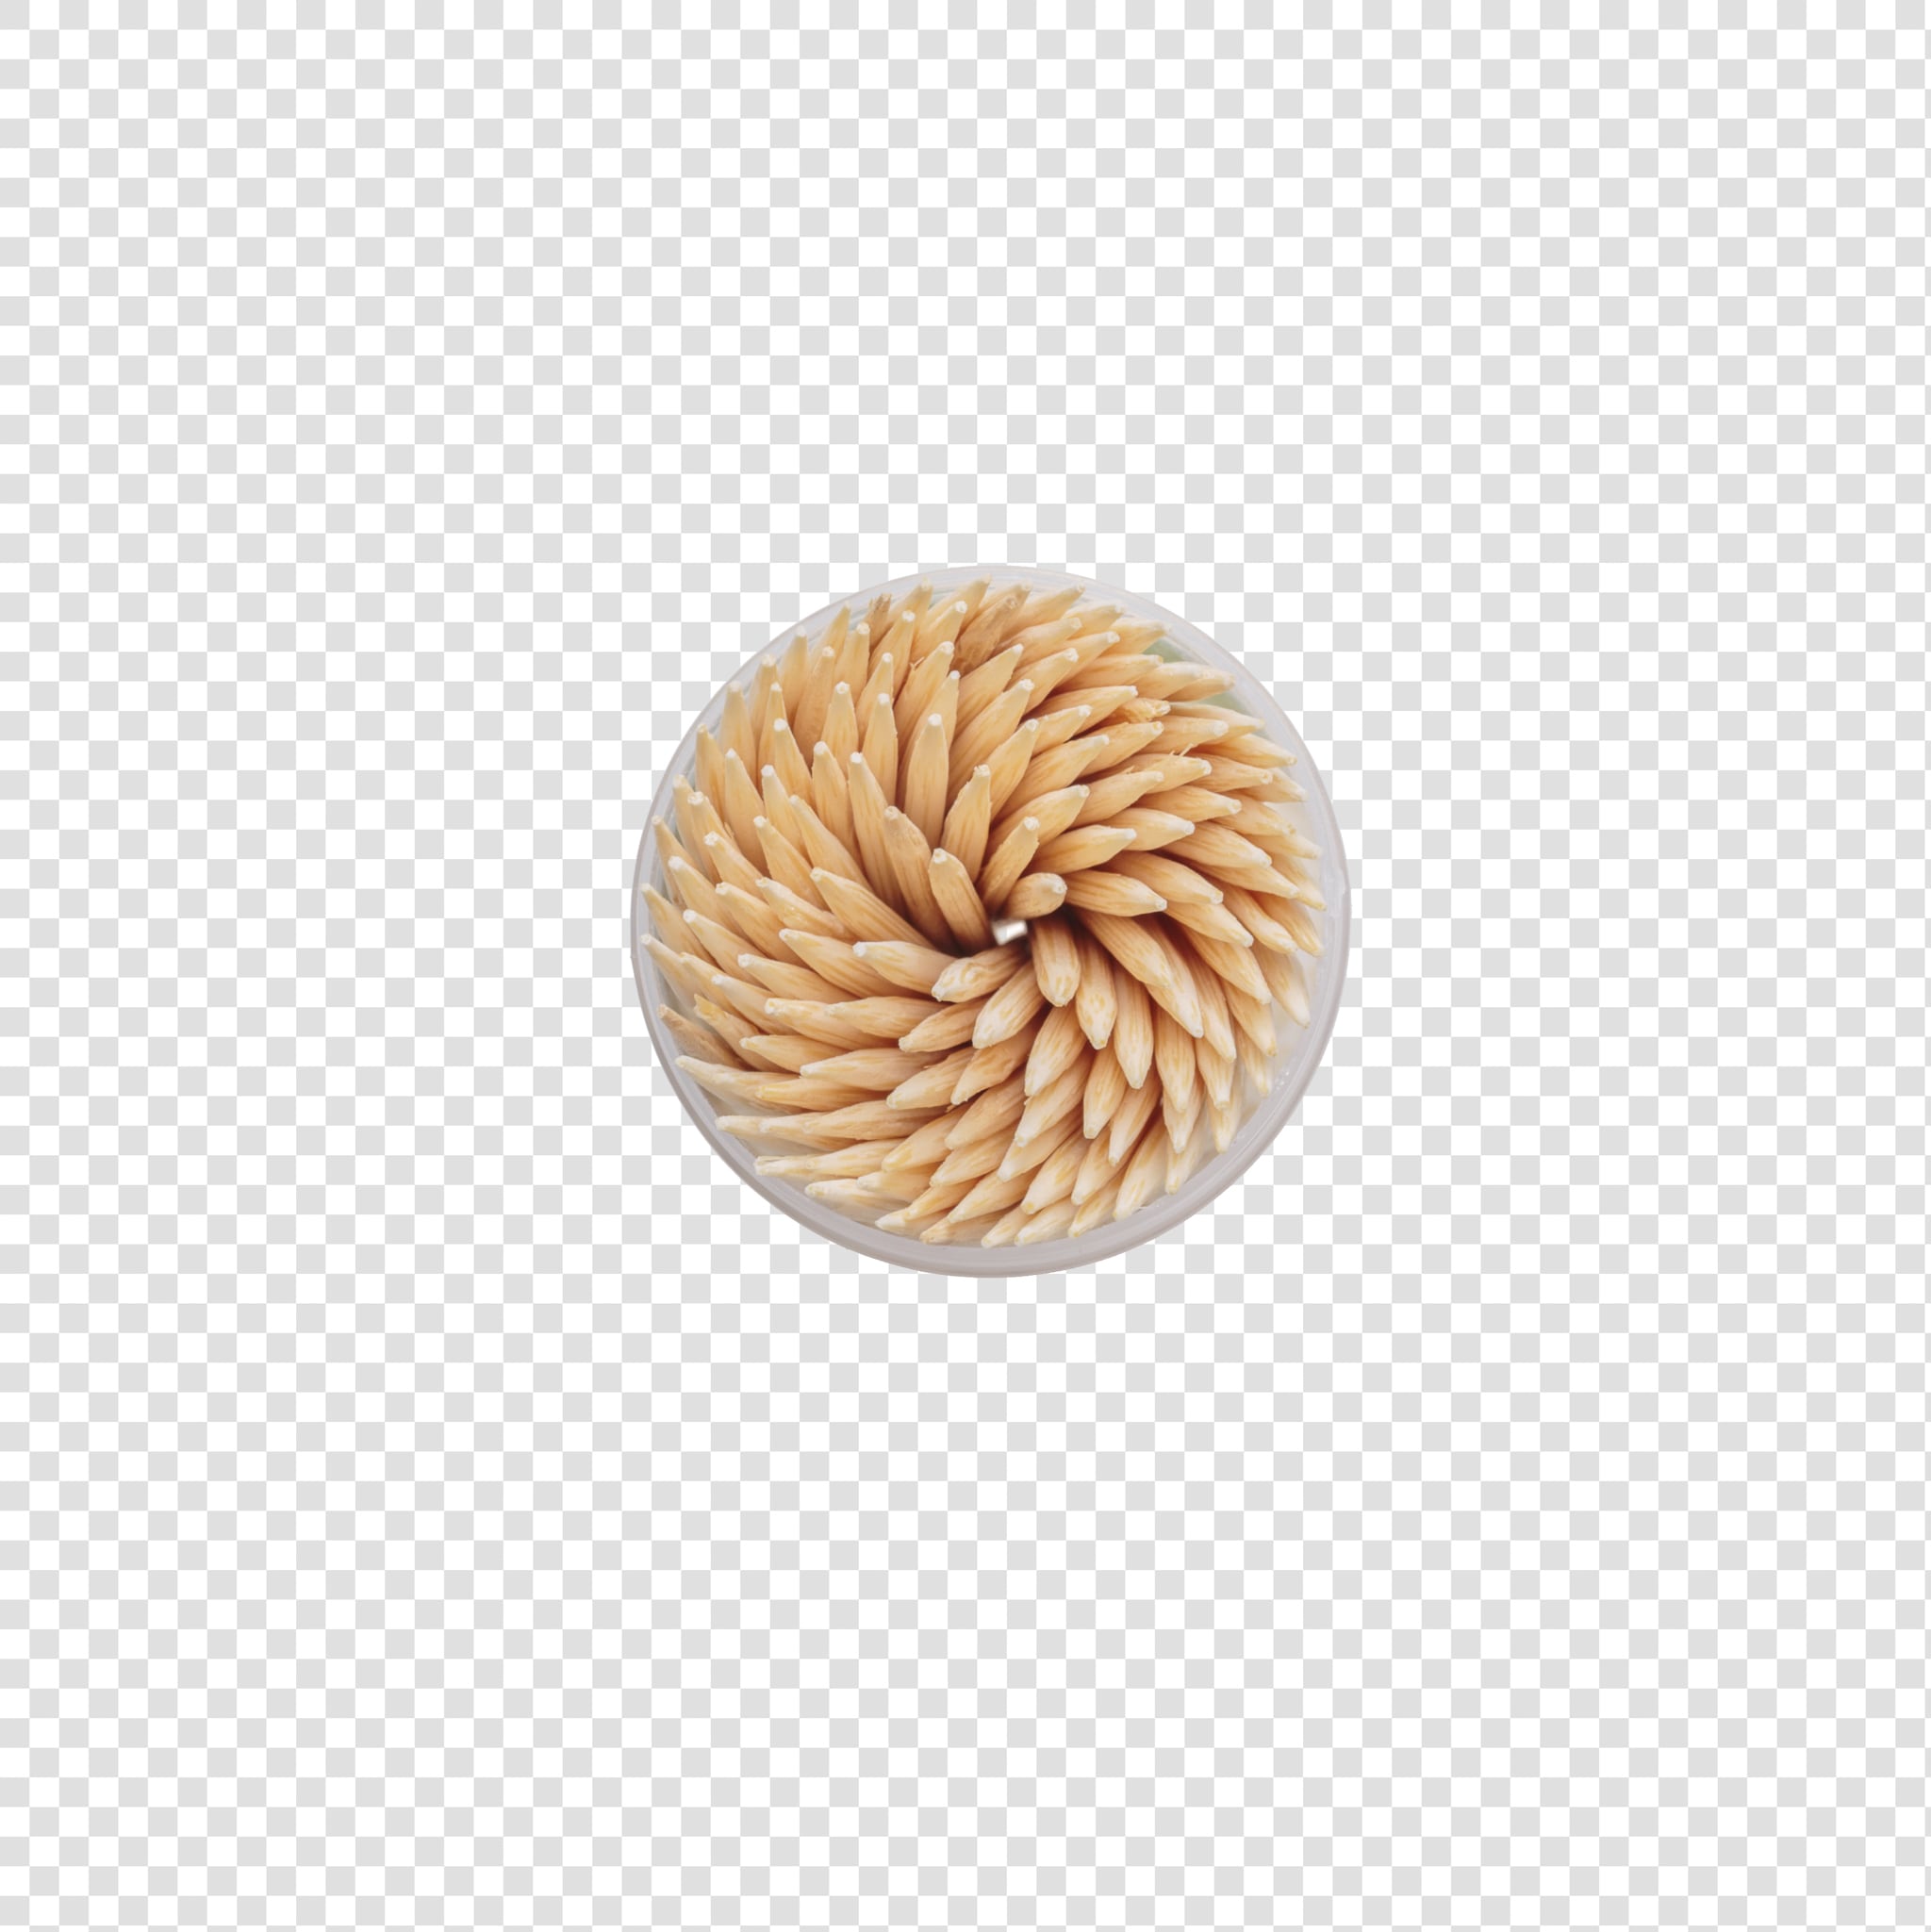 Toothpick PSD isolated image